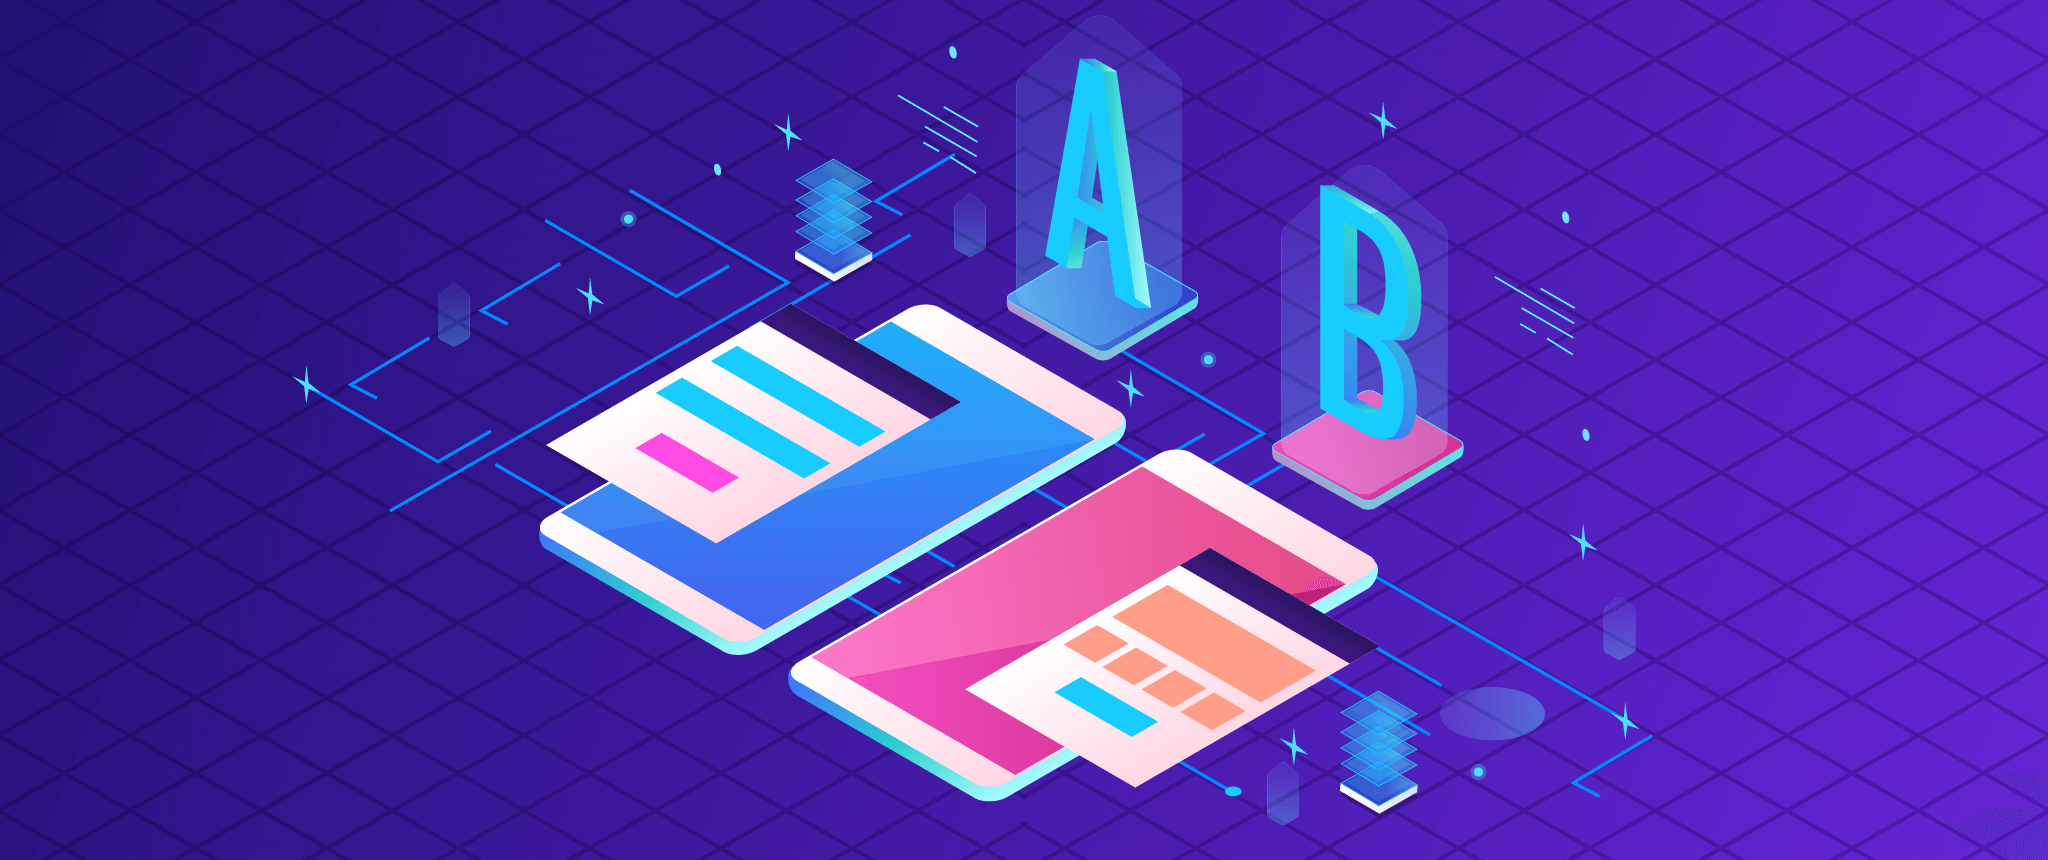 Design A/B Testing for more effective mobile marketing campaigns